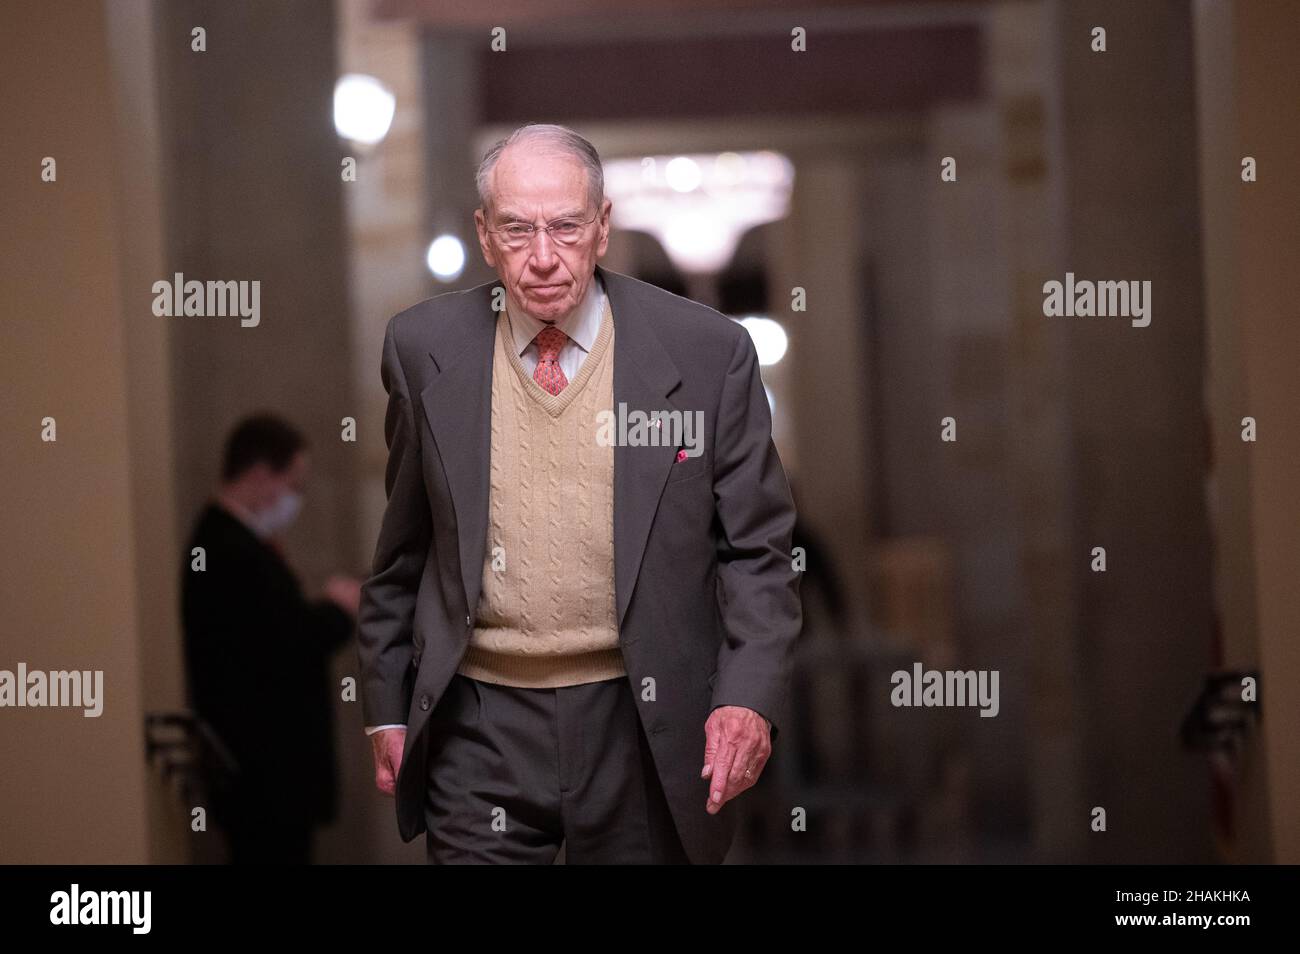 Washington, USA. 13th Dec, 2021. Senator Chuck Grassley (R-IA) walks through the U.S. Capitol, in Washington, DC, on Monday, December 13, 2021. The House Committee Investigating the January 6th insurrection voted on Monday to recommend contempt charges against former White House chief of staff Mark Meadows, as negotiations over President Biden's Build Back Better agenda near a critical point before the winter holiday recess. (Graeme Sloan/Sipa USA) Credit: Sipa USA/Alamy Live News Stock Photo